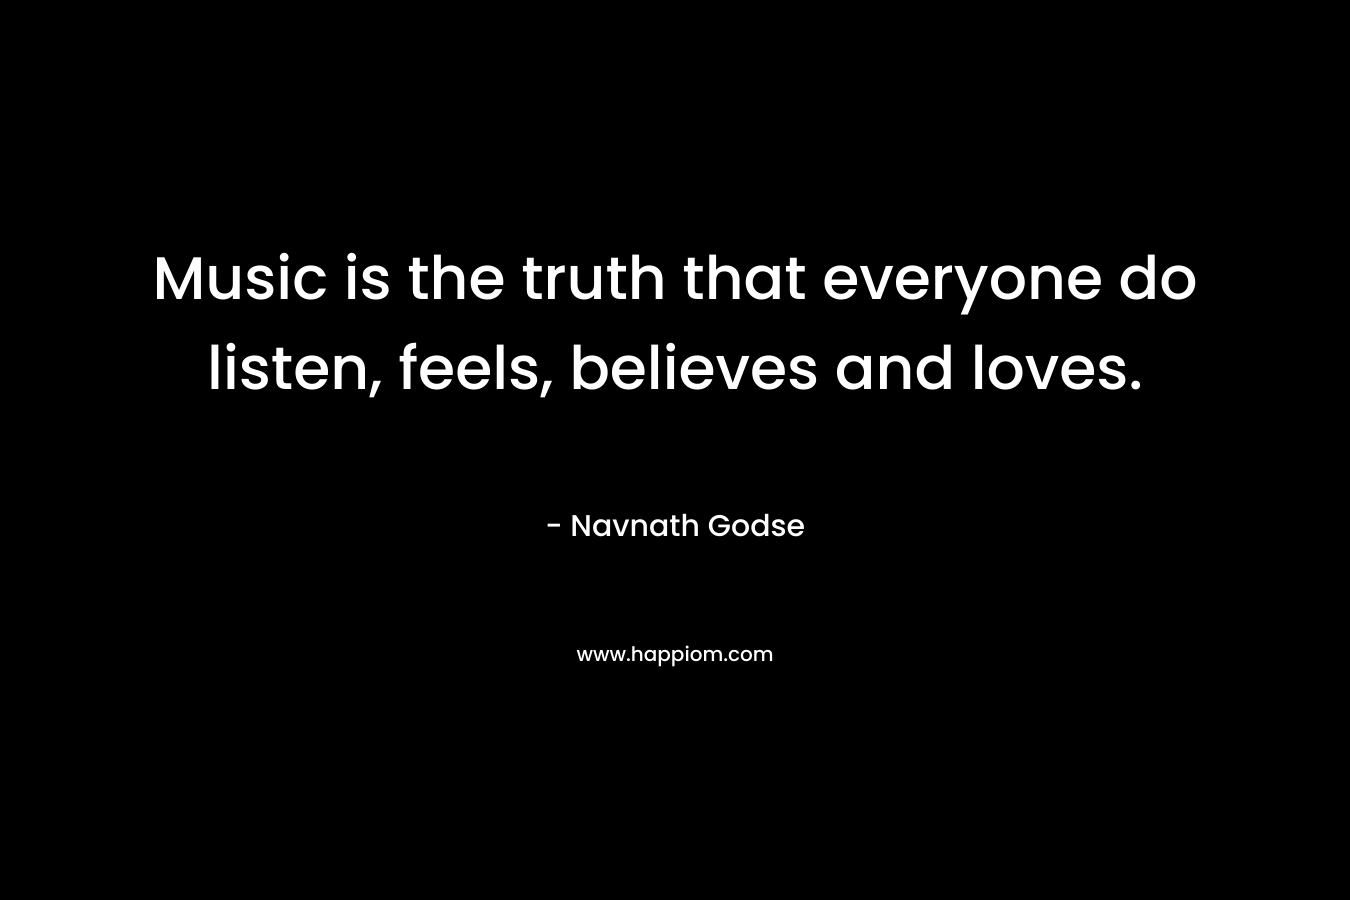 Music is the truth that everyone do listen, feels, believes and loves.